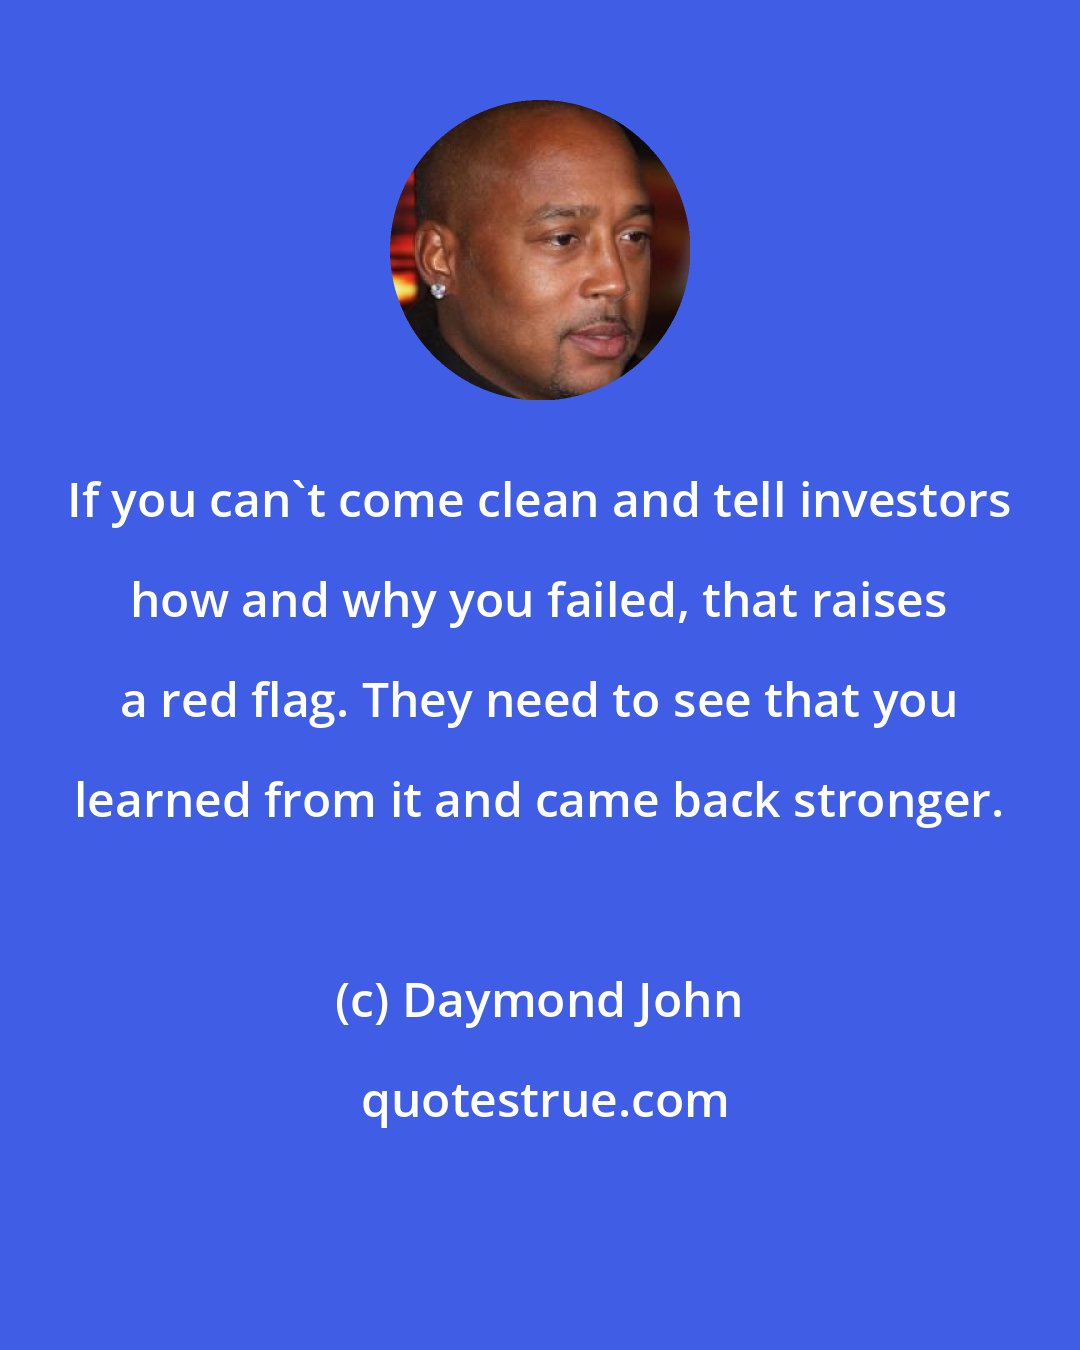 Daymond John: If you can't come clean and tell investors how and why you failed, that raises a red flag. They need to see that you learned from it and came back stronger.